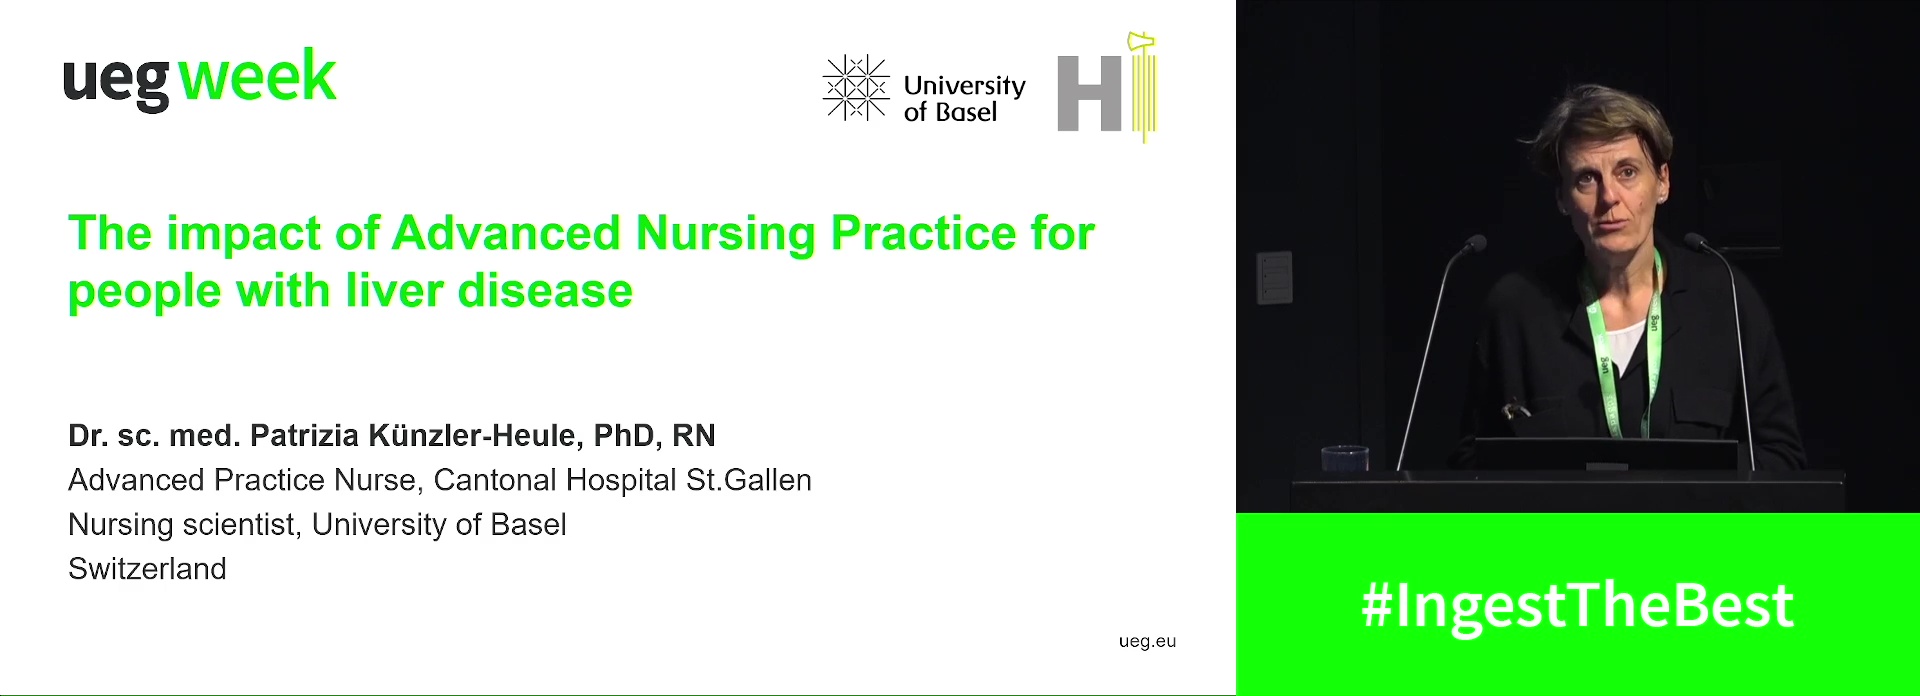 The impact of advanced nursing practice for people with liver diseases